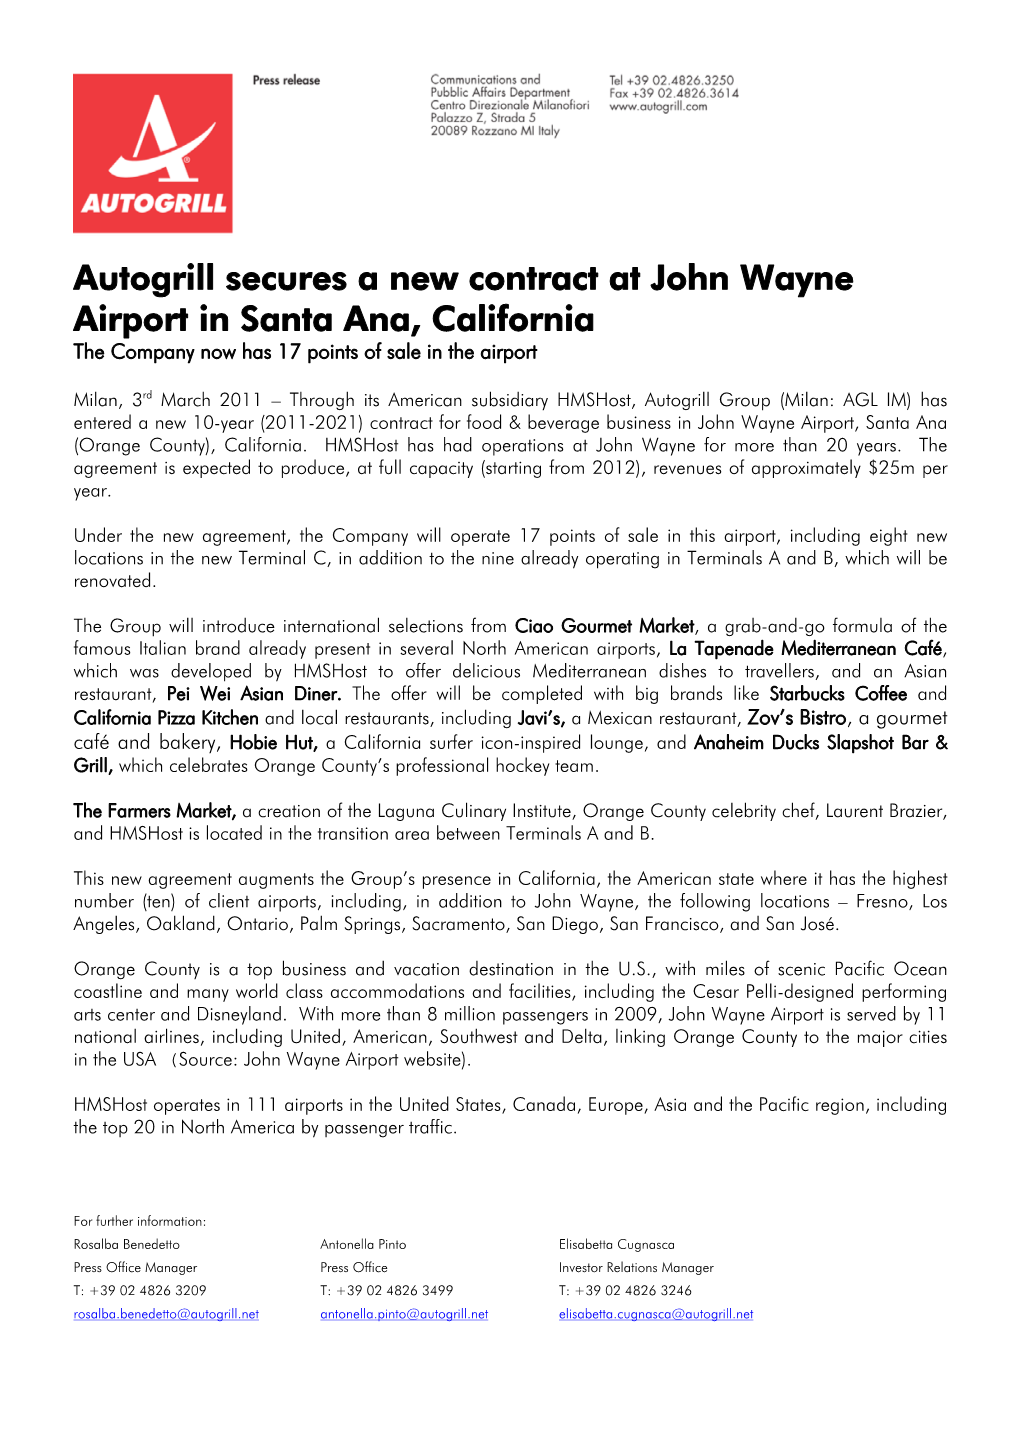 Autogrill Secures a New Contract at John Wayne Airport in Santa Ana, California the Company Now Has 17 Points of Sale in the Airport